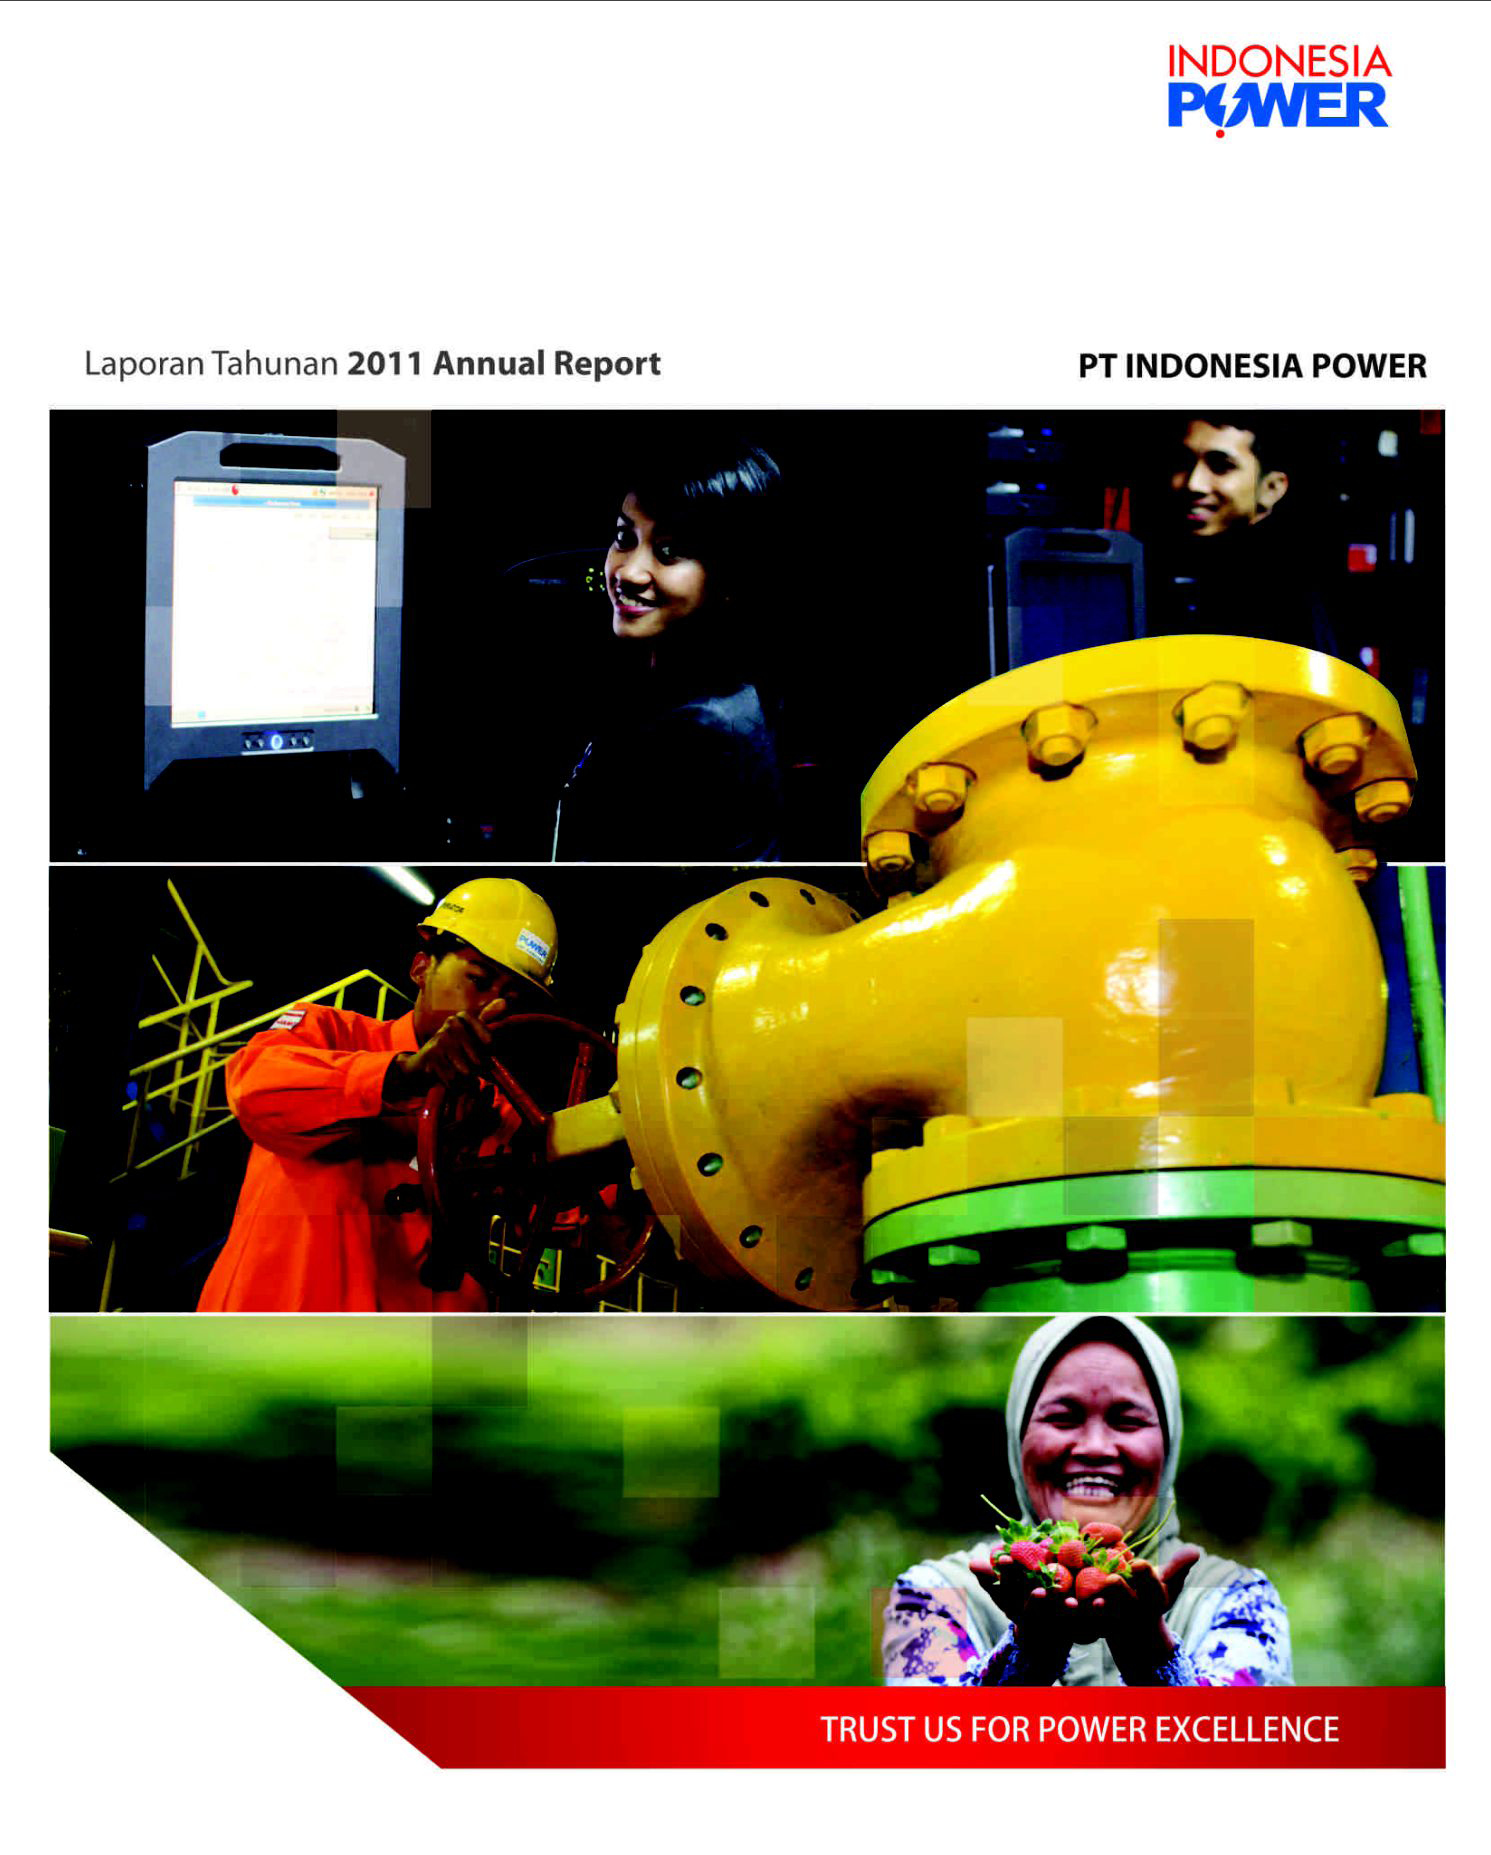 LACP 2012 Vision Awards Annual Report Competition  PT Indonesia Power